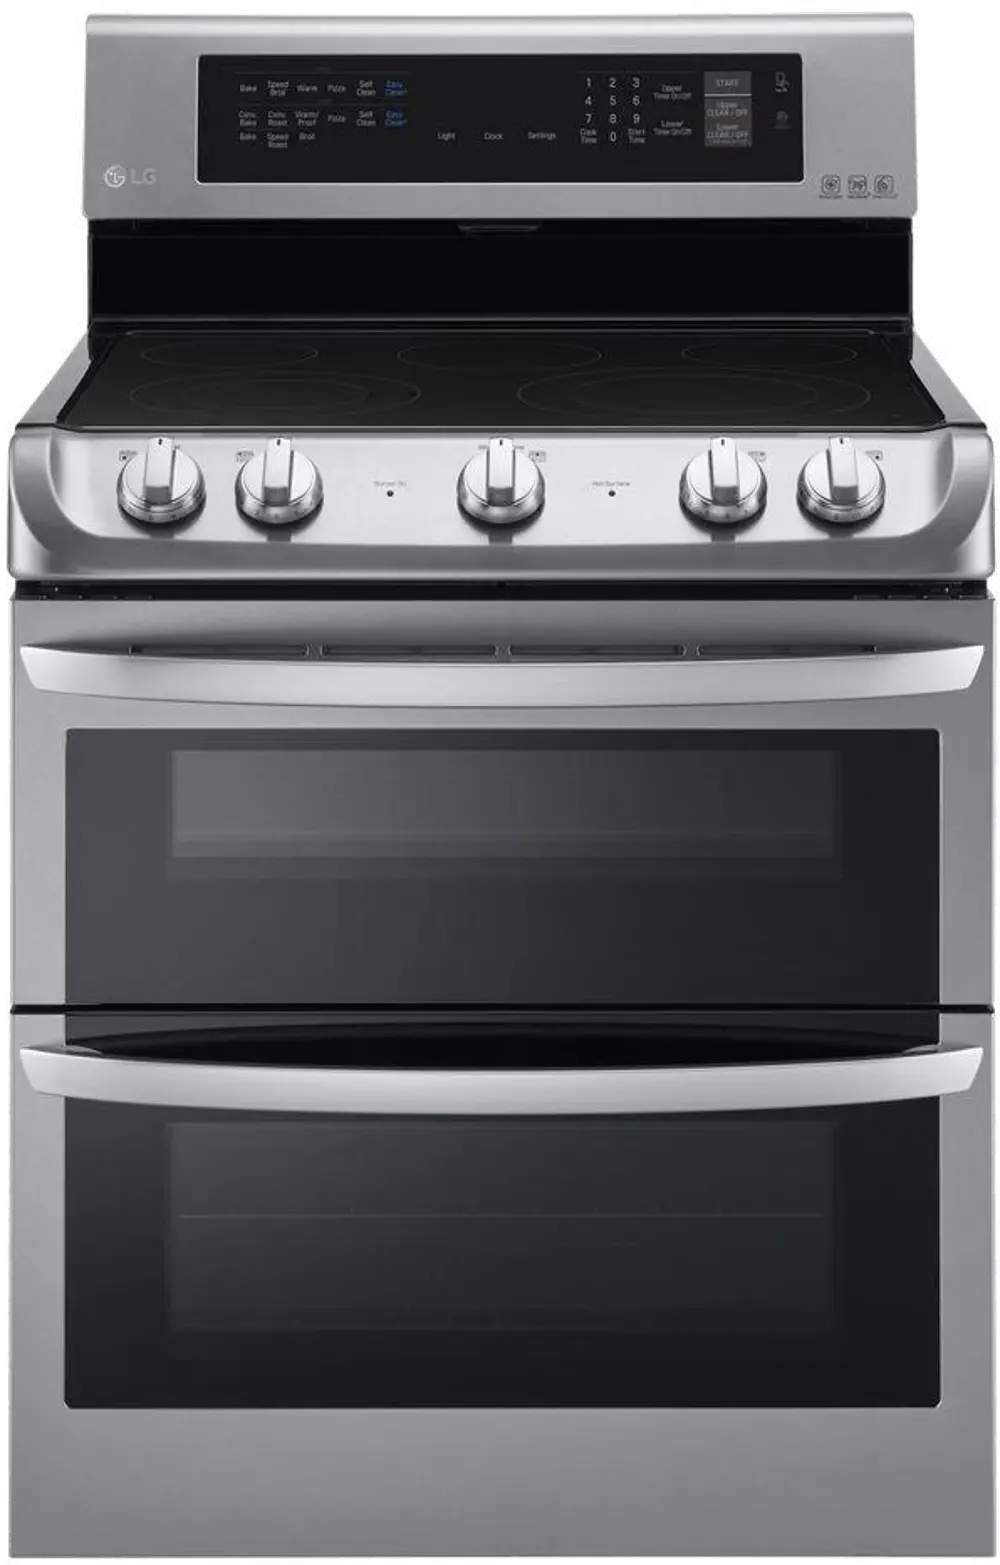 LDE4413ST LG 7.3 cu ft Double Oven Electric Range - Stainless Steel-1